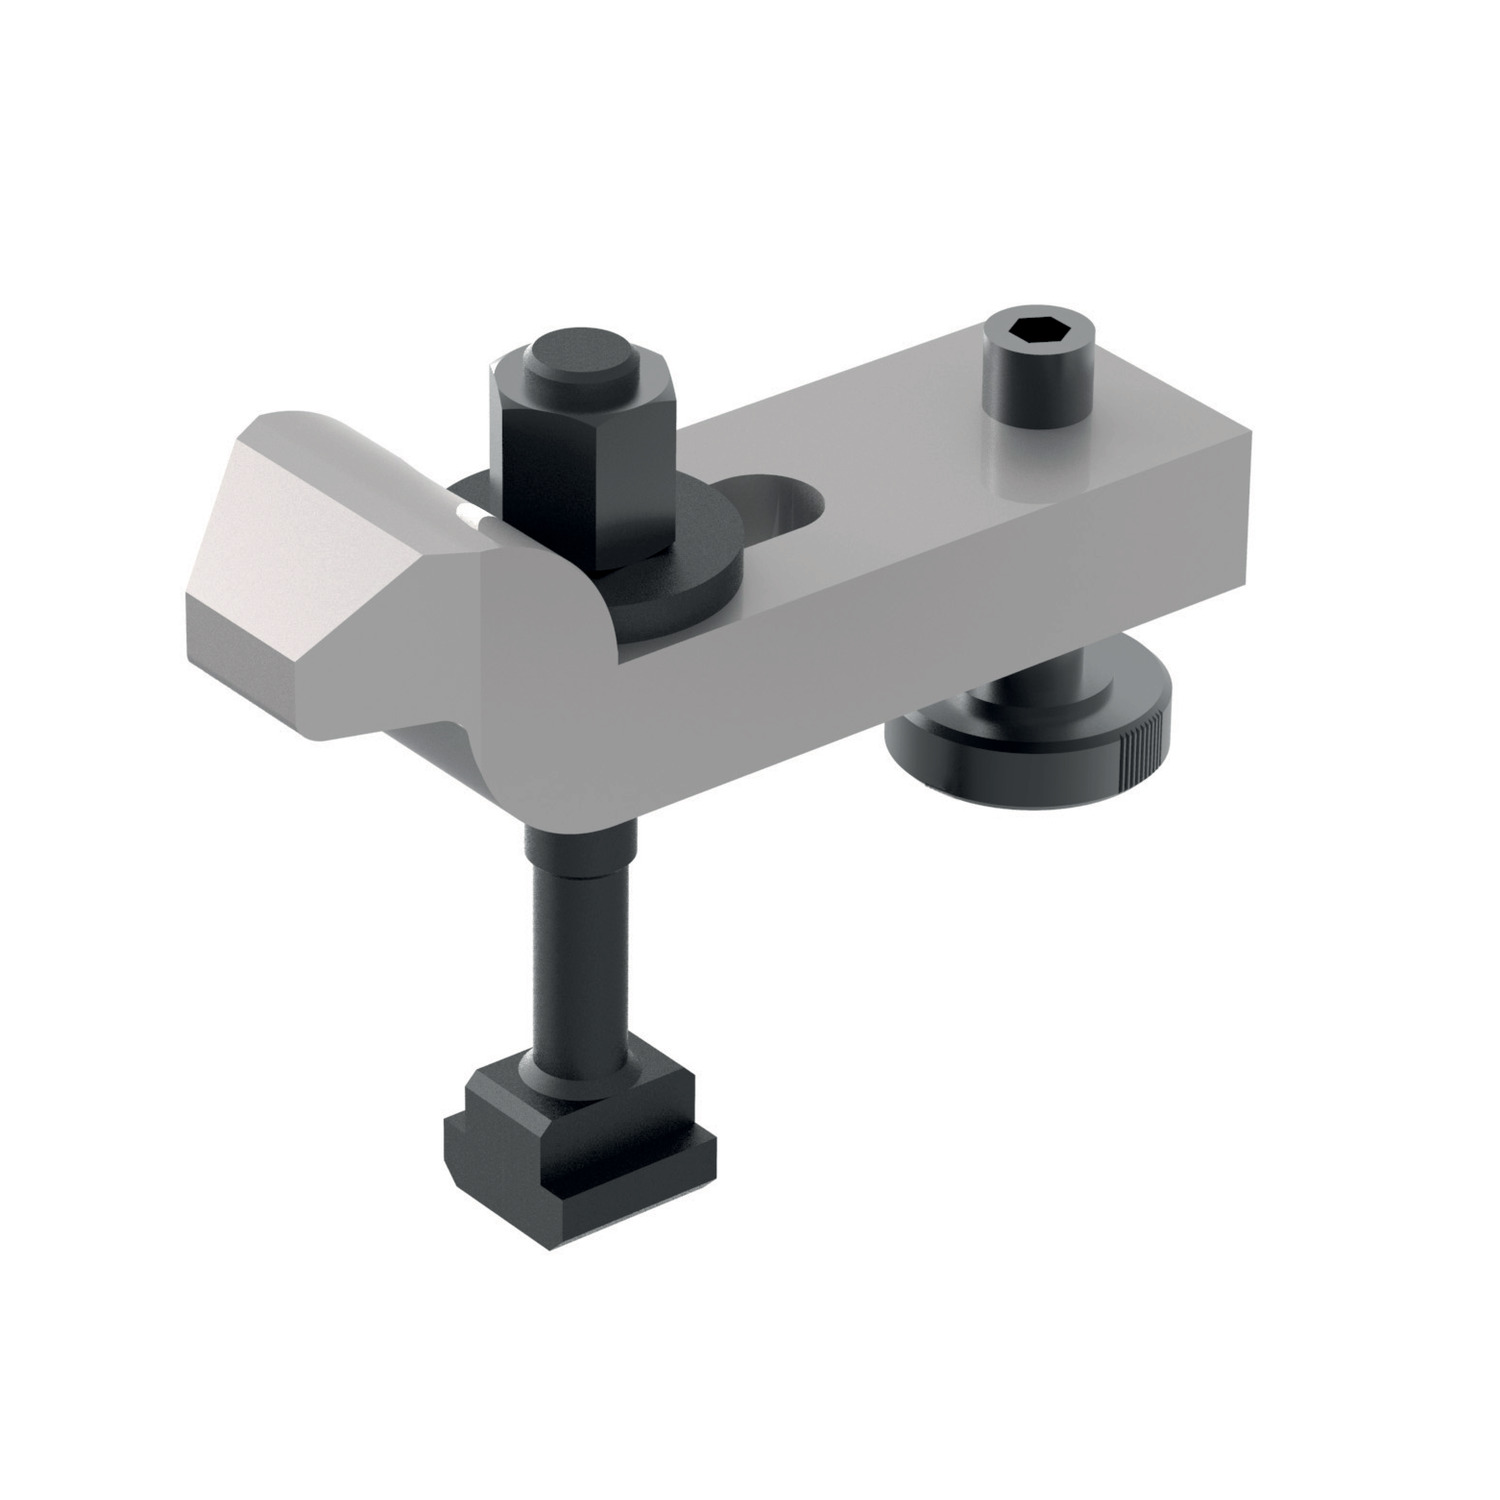 Adjustable Goose Neck Clamps The Adjustable goose-neck clamps with or without t-slot bolt and suppied with a height adjusting screw.